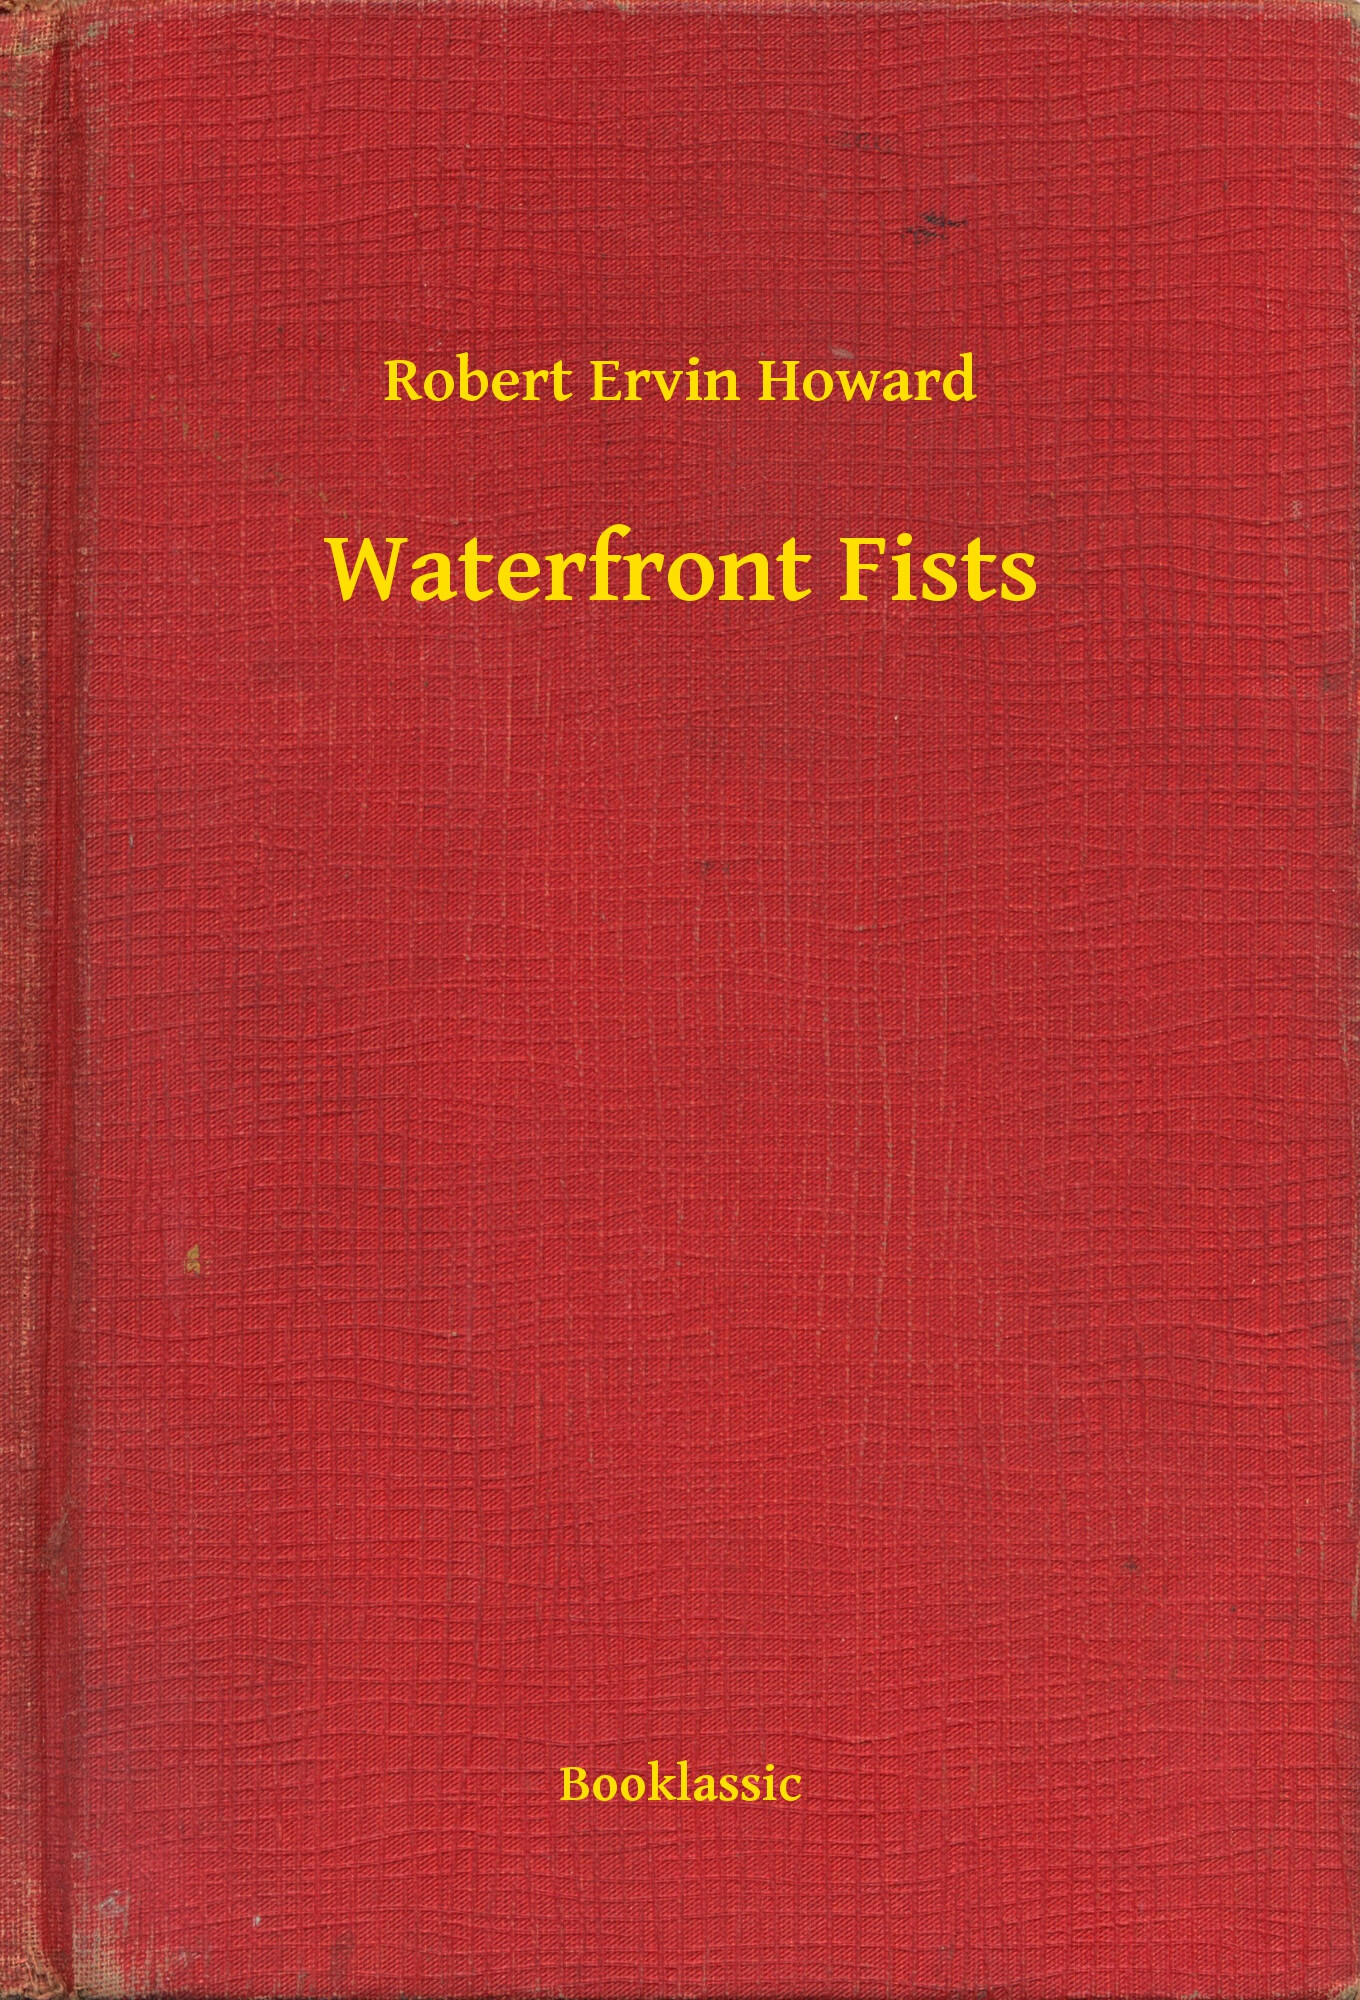 waterfront fists